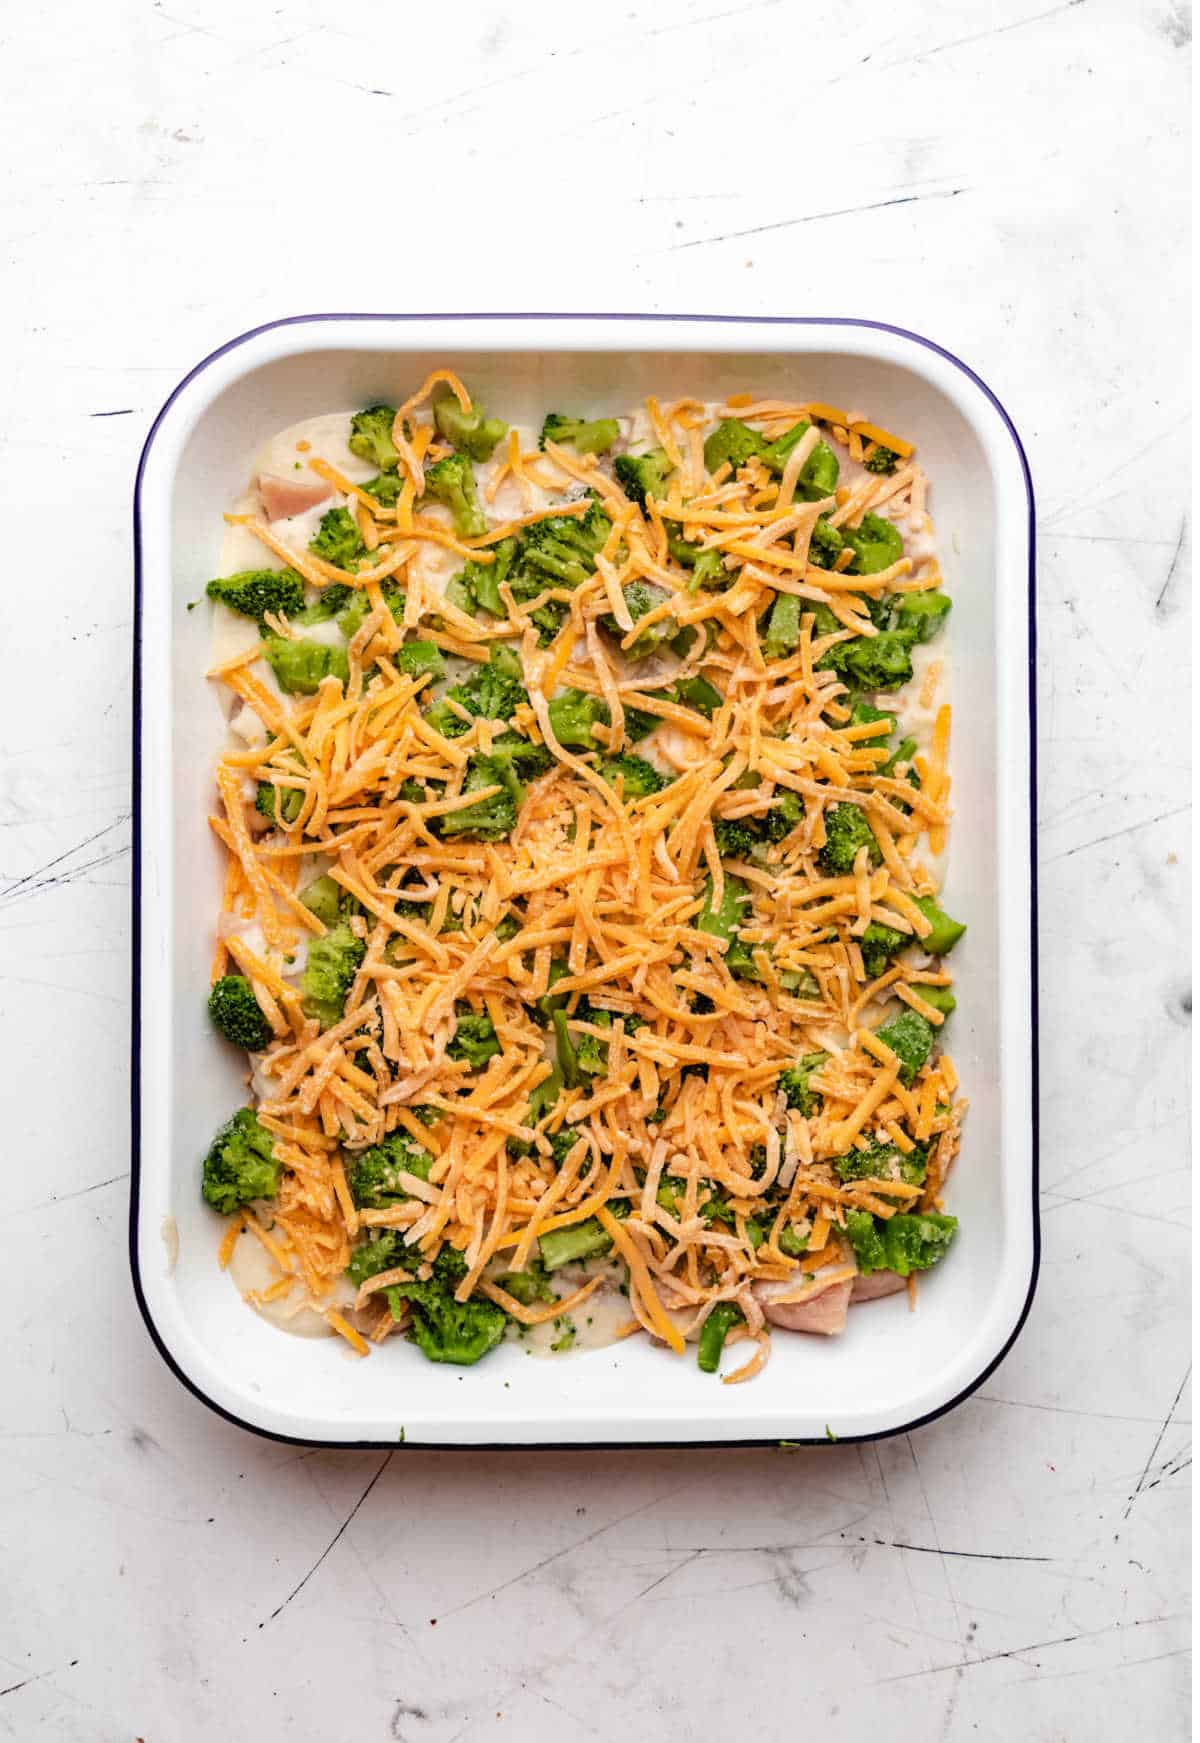 Shredded cheddar cheese over broccoli in a baking dish.